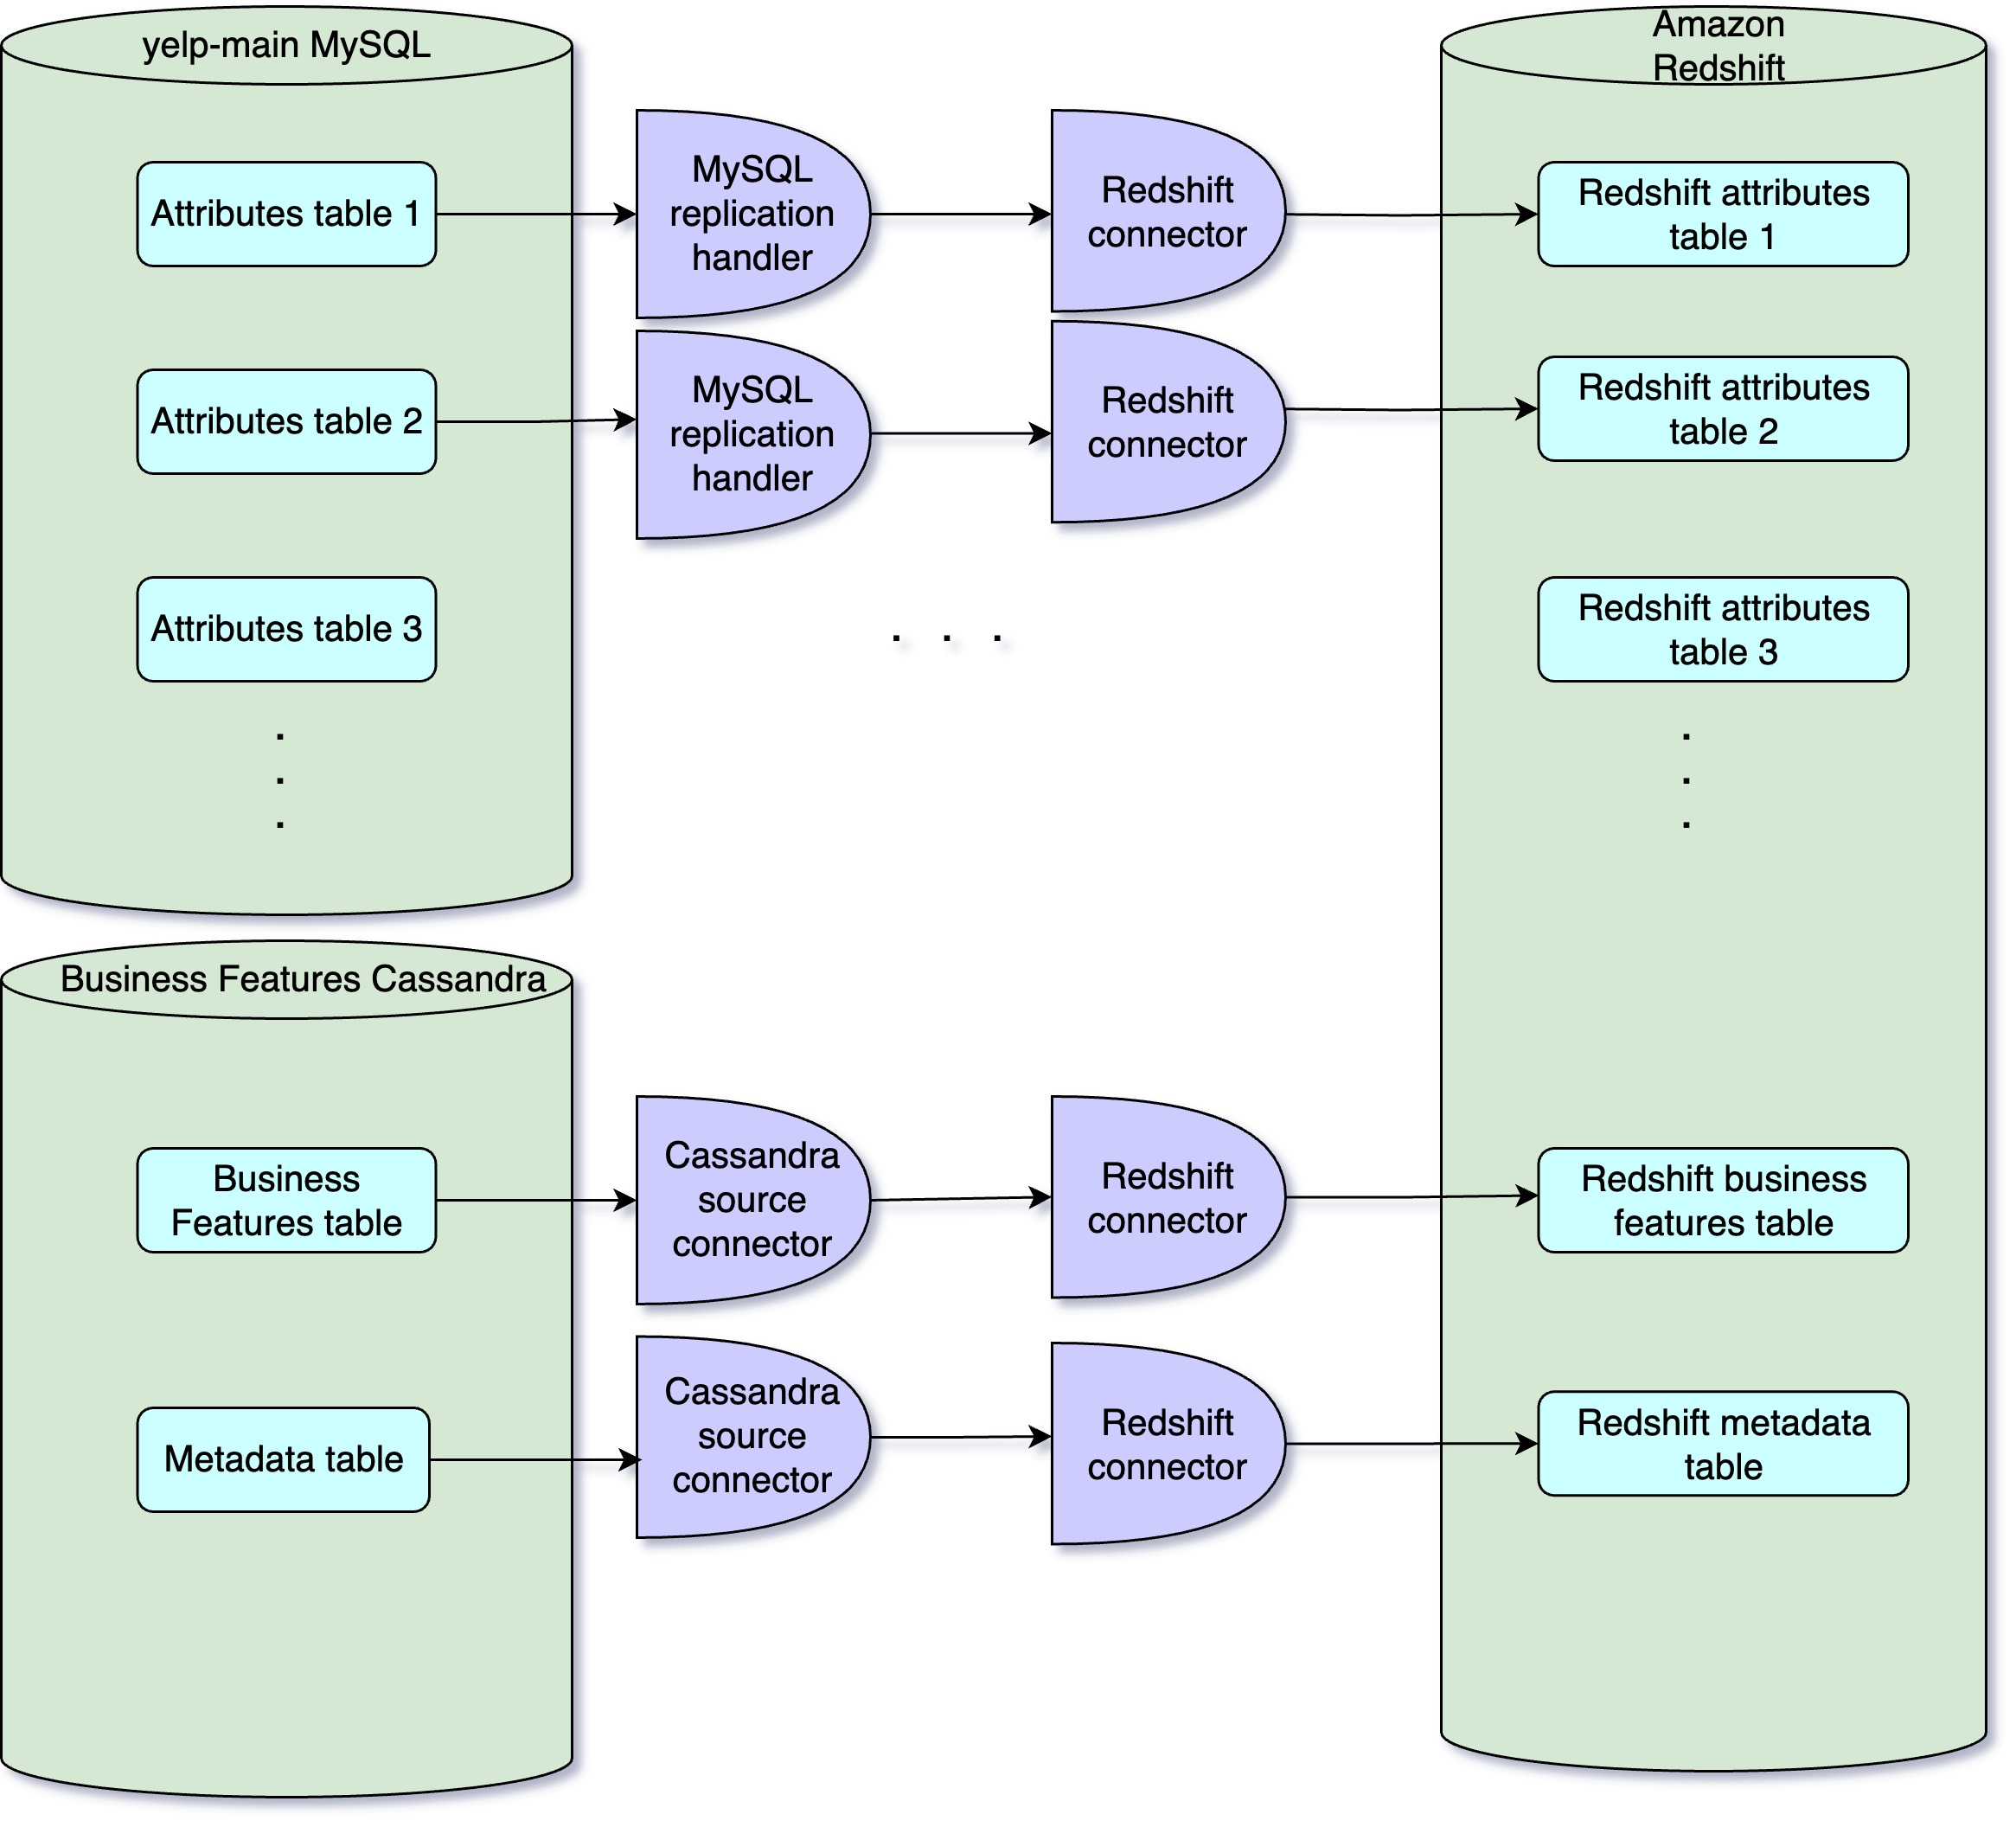 Existing Business Properties' streaming architecture